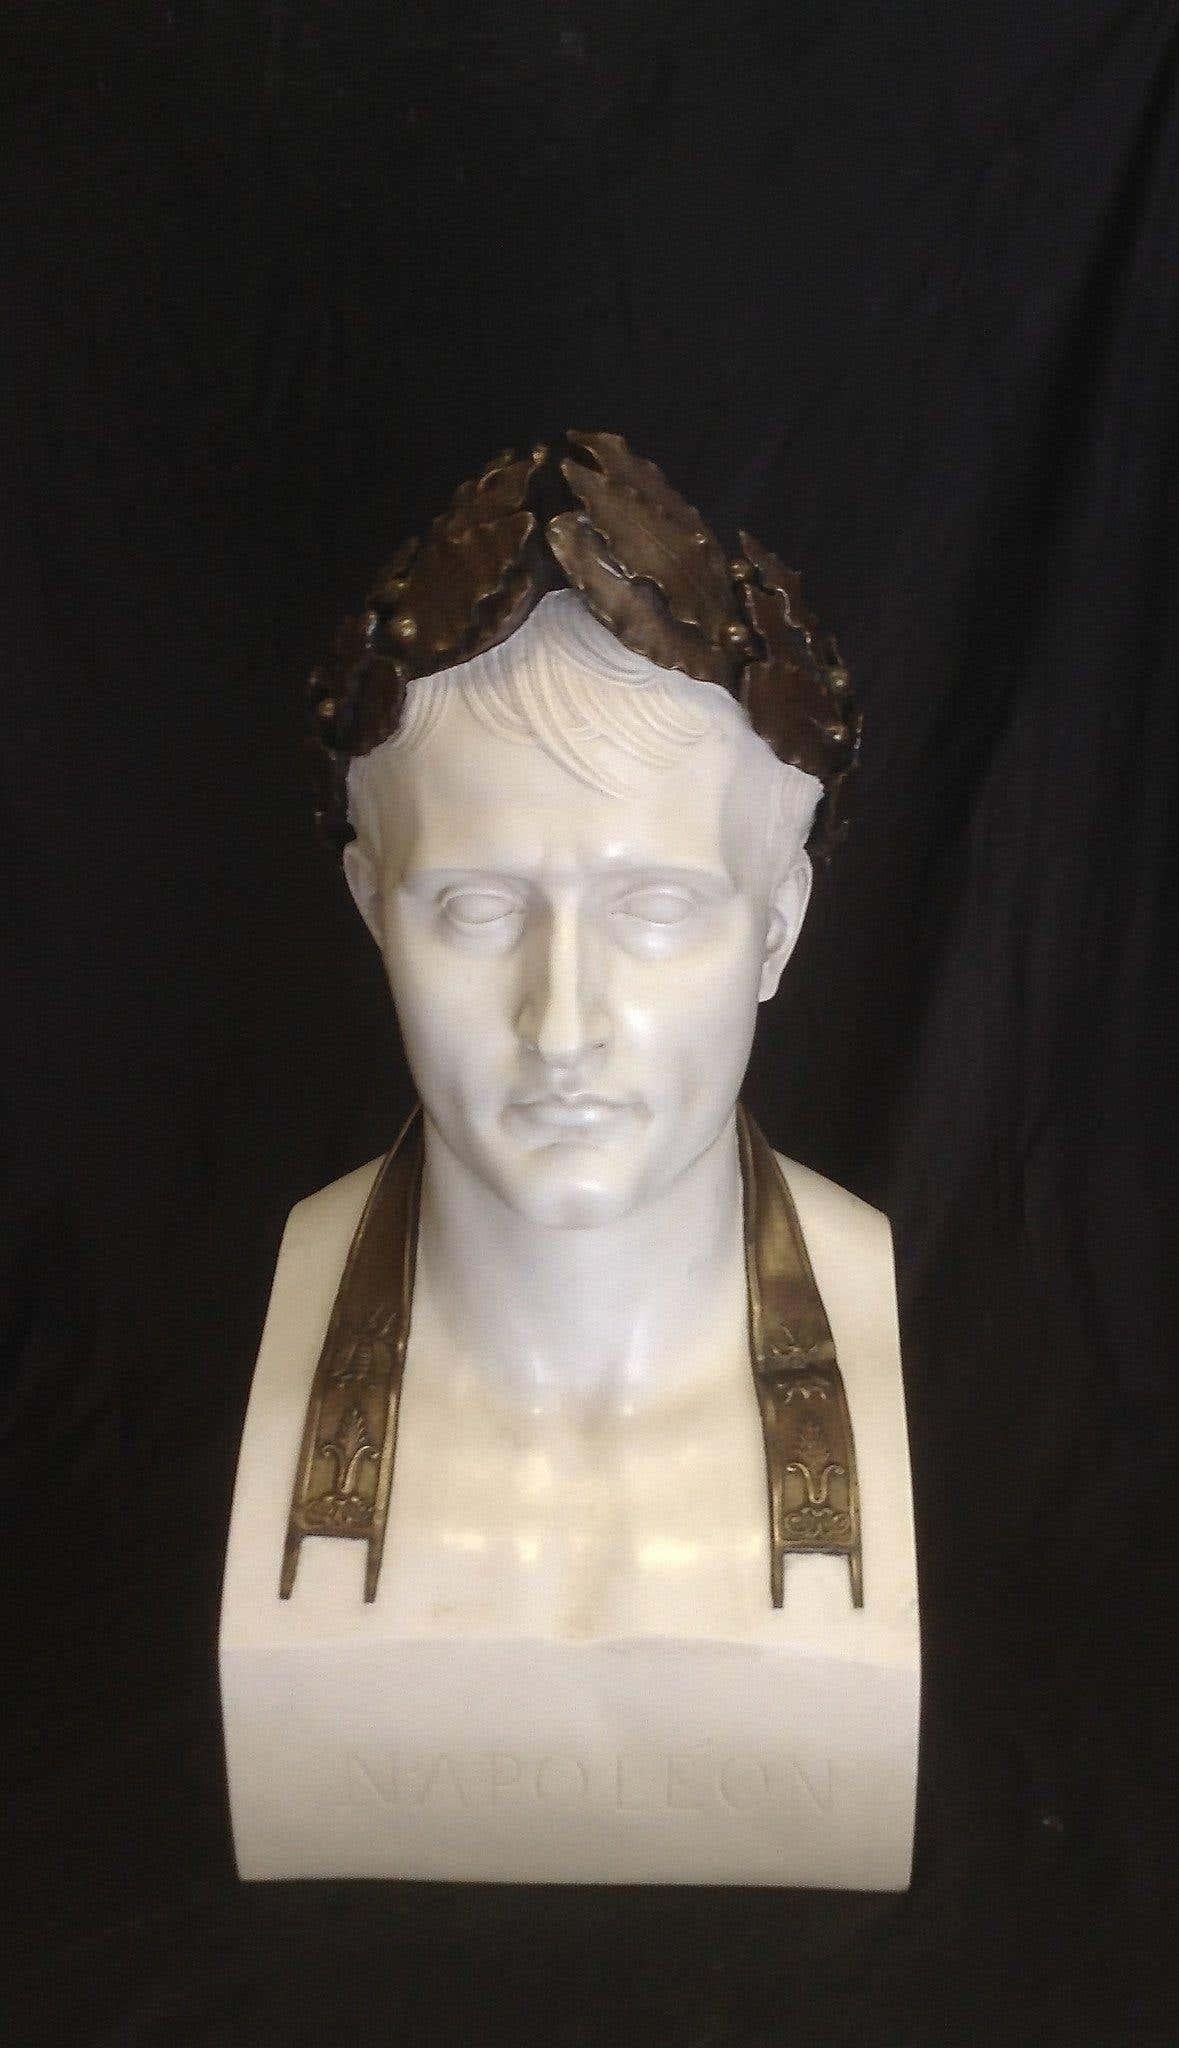 A stunning Napoleon as Caesar marble bust, 20th century.
Napoleon as Caesar, a bust, after the antique by Canova, 1804.
Finished in marble and bronze.

In 1802 Napoleon brought the finest Italian neoclassical sculptor, Antonio Canova, to Paris